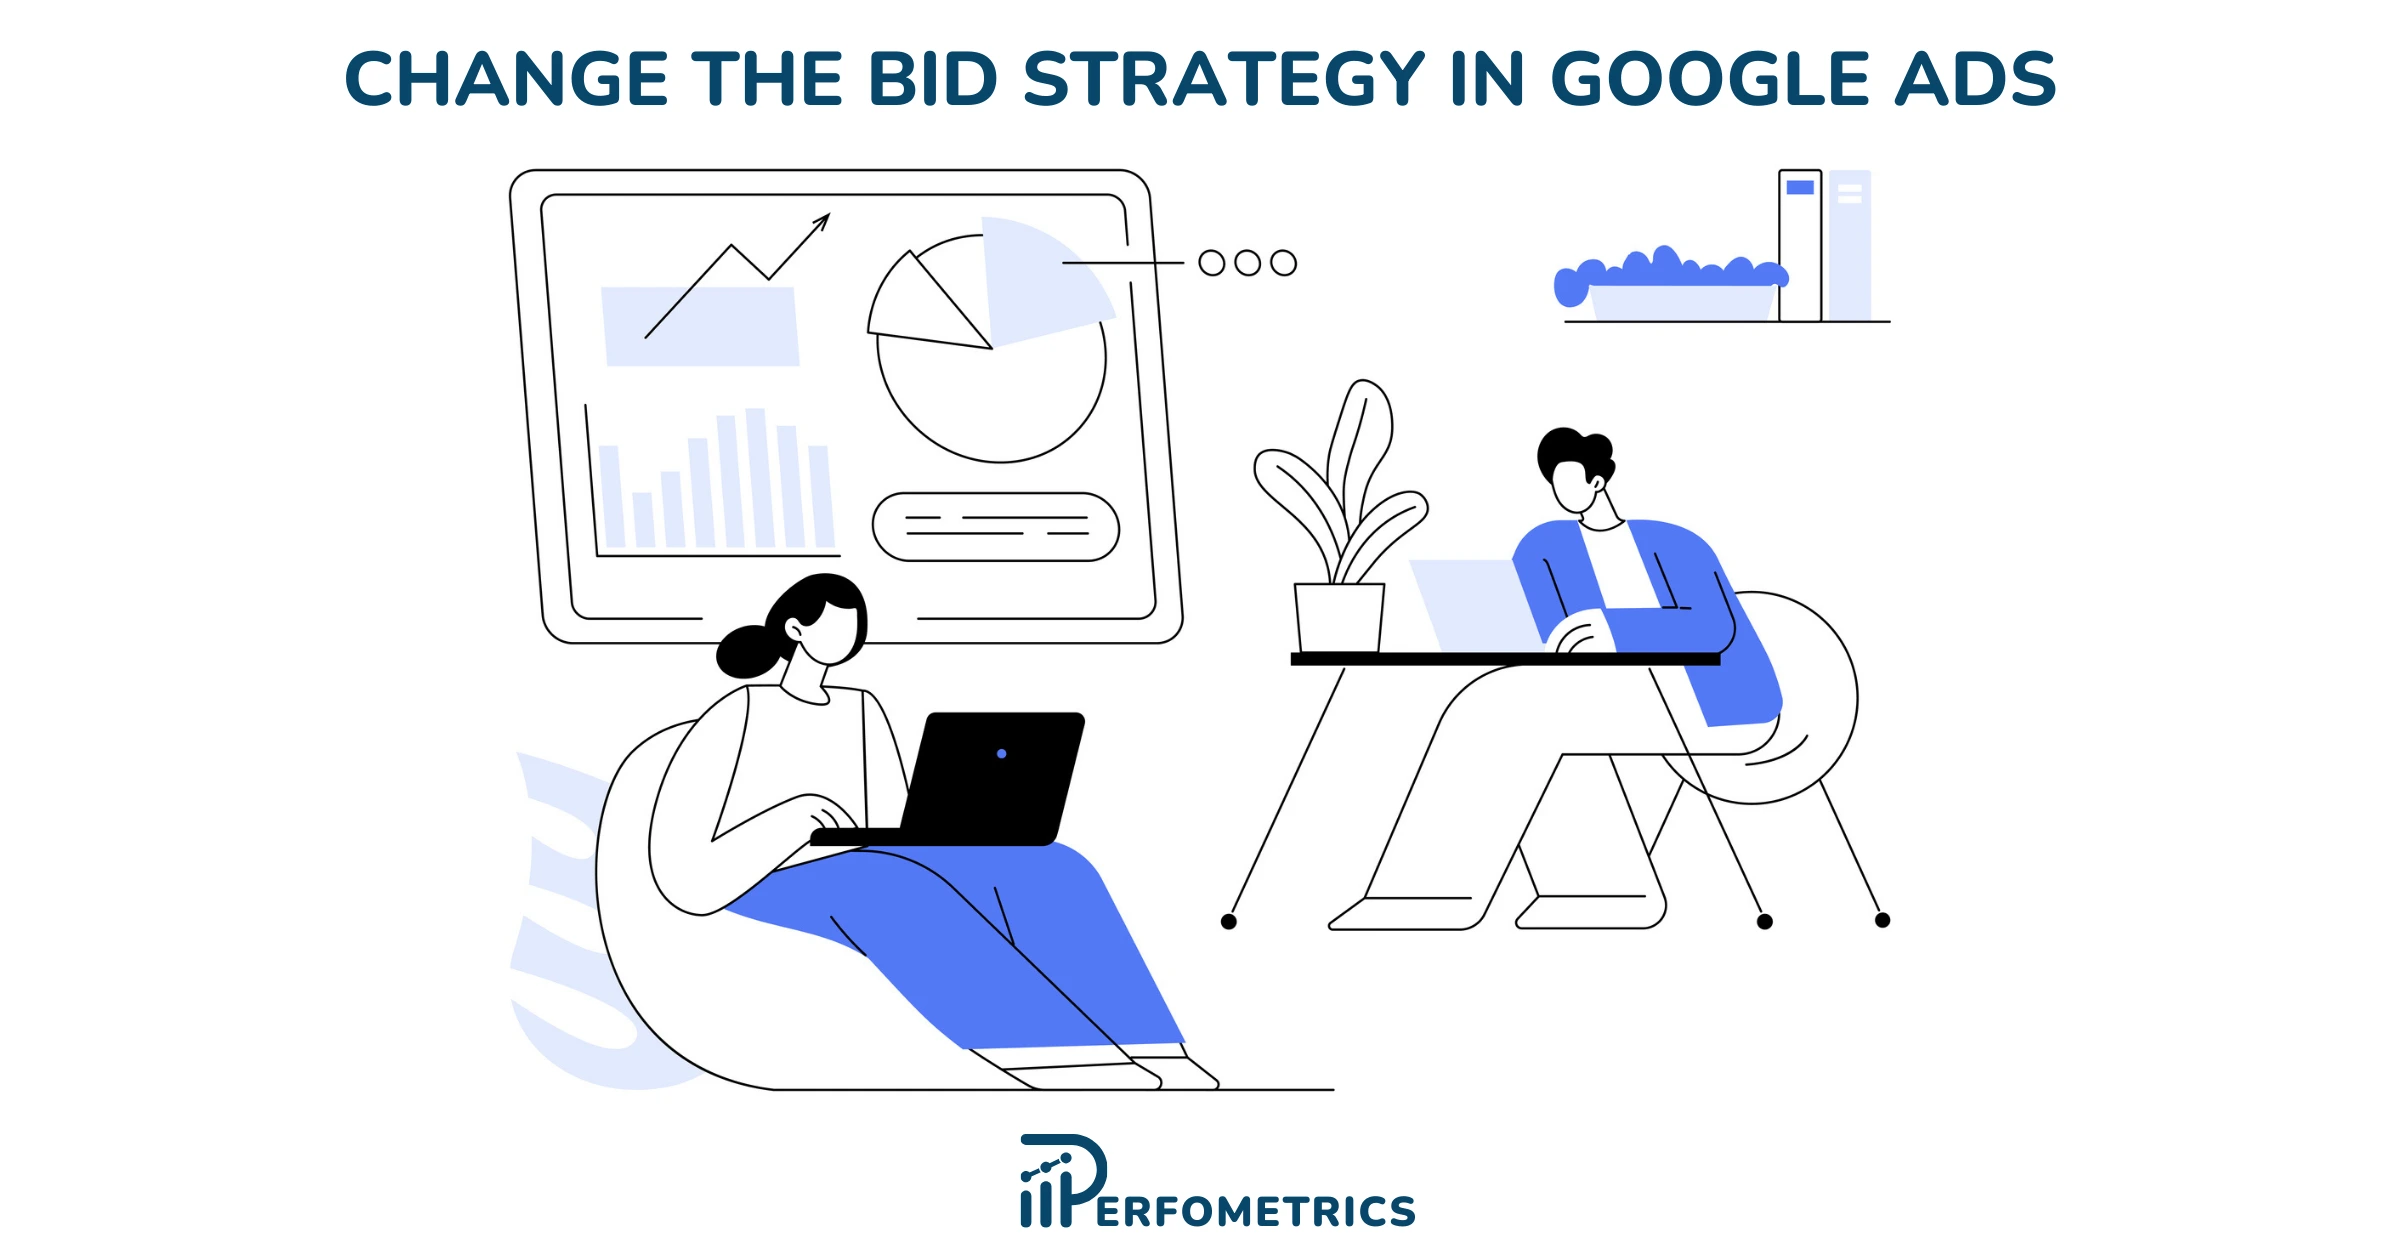 How To Change The Bid Strategy in Google Ads